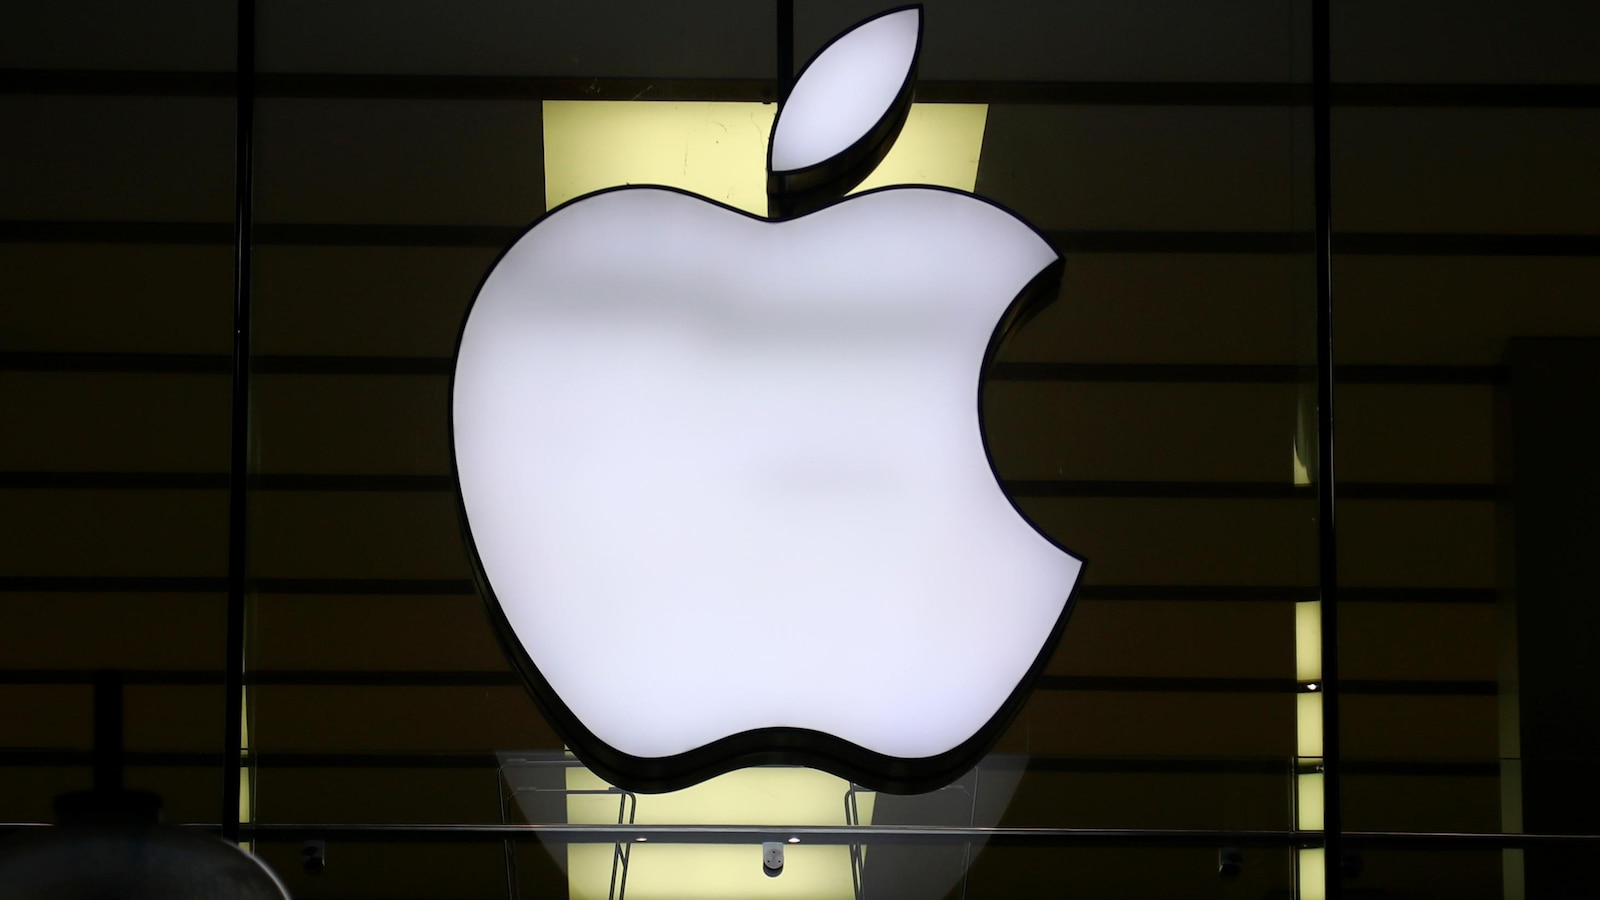 Apple's Proposal to Rivals: Access to Tap-and-Go Payment Tech to Resolve EU Antitrust Case